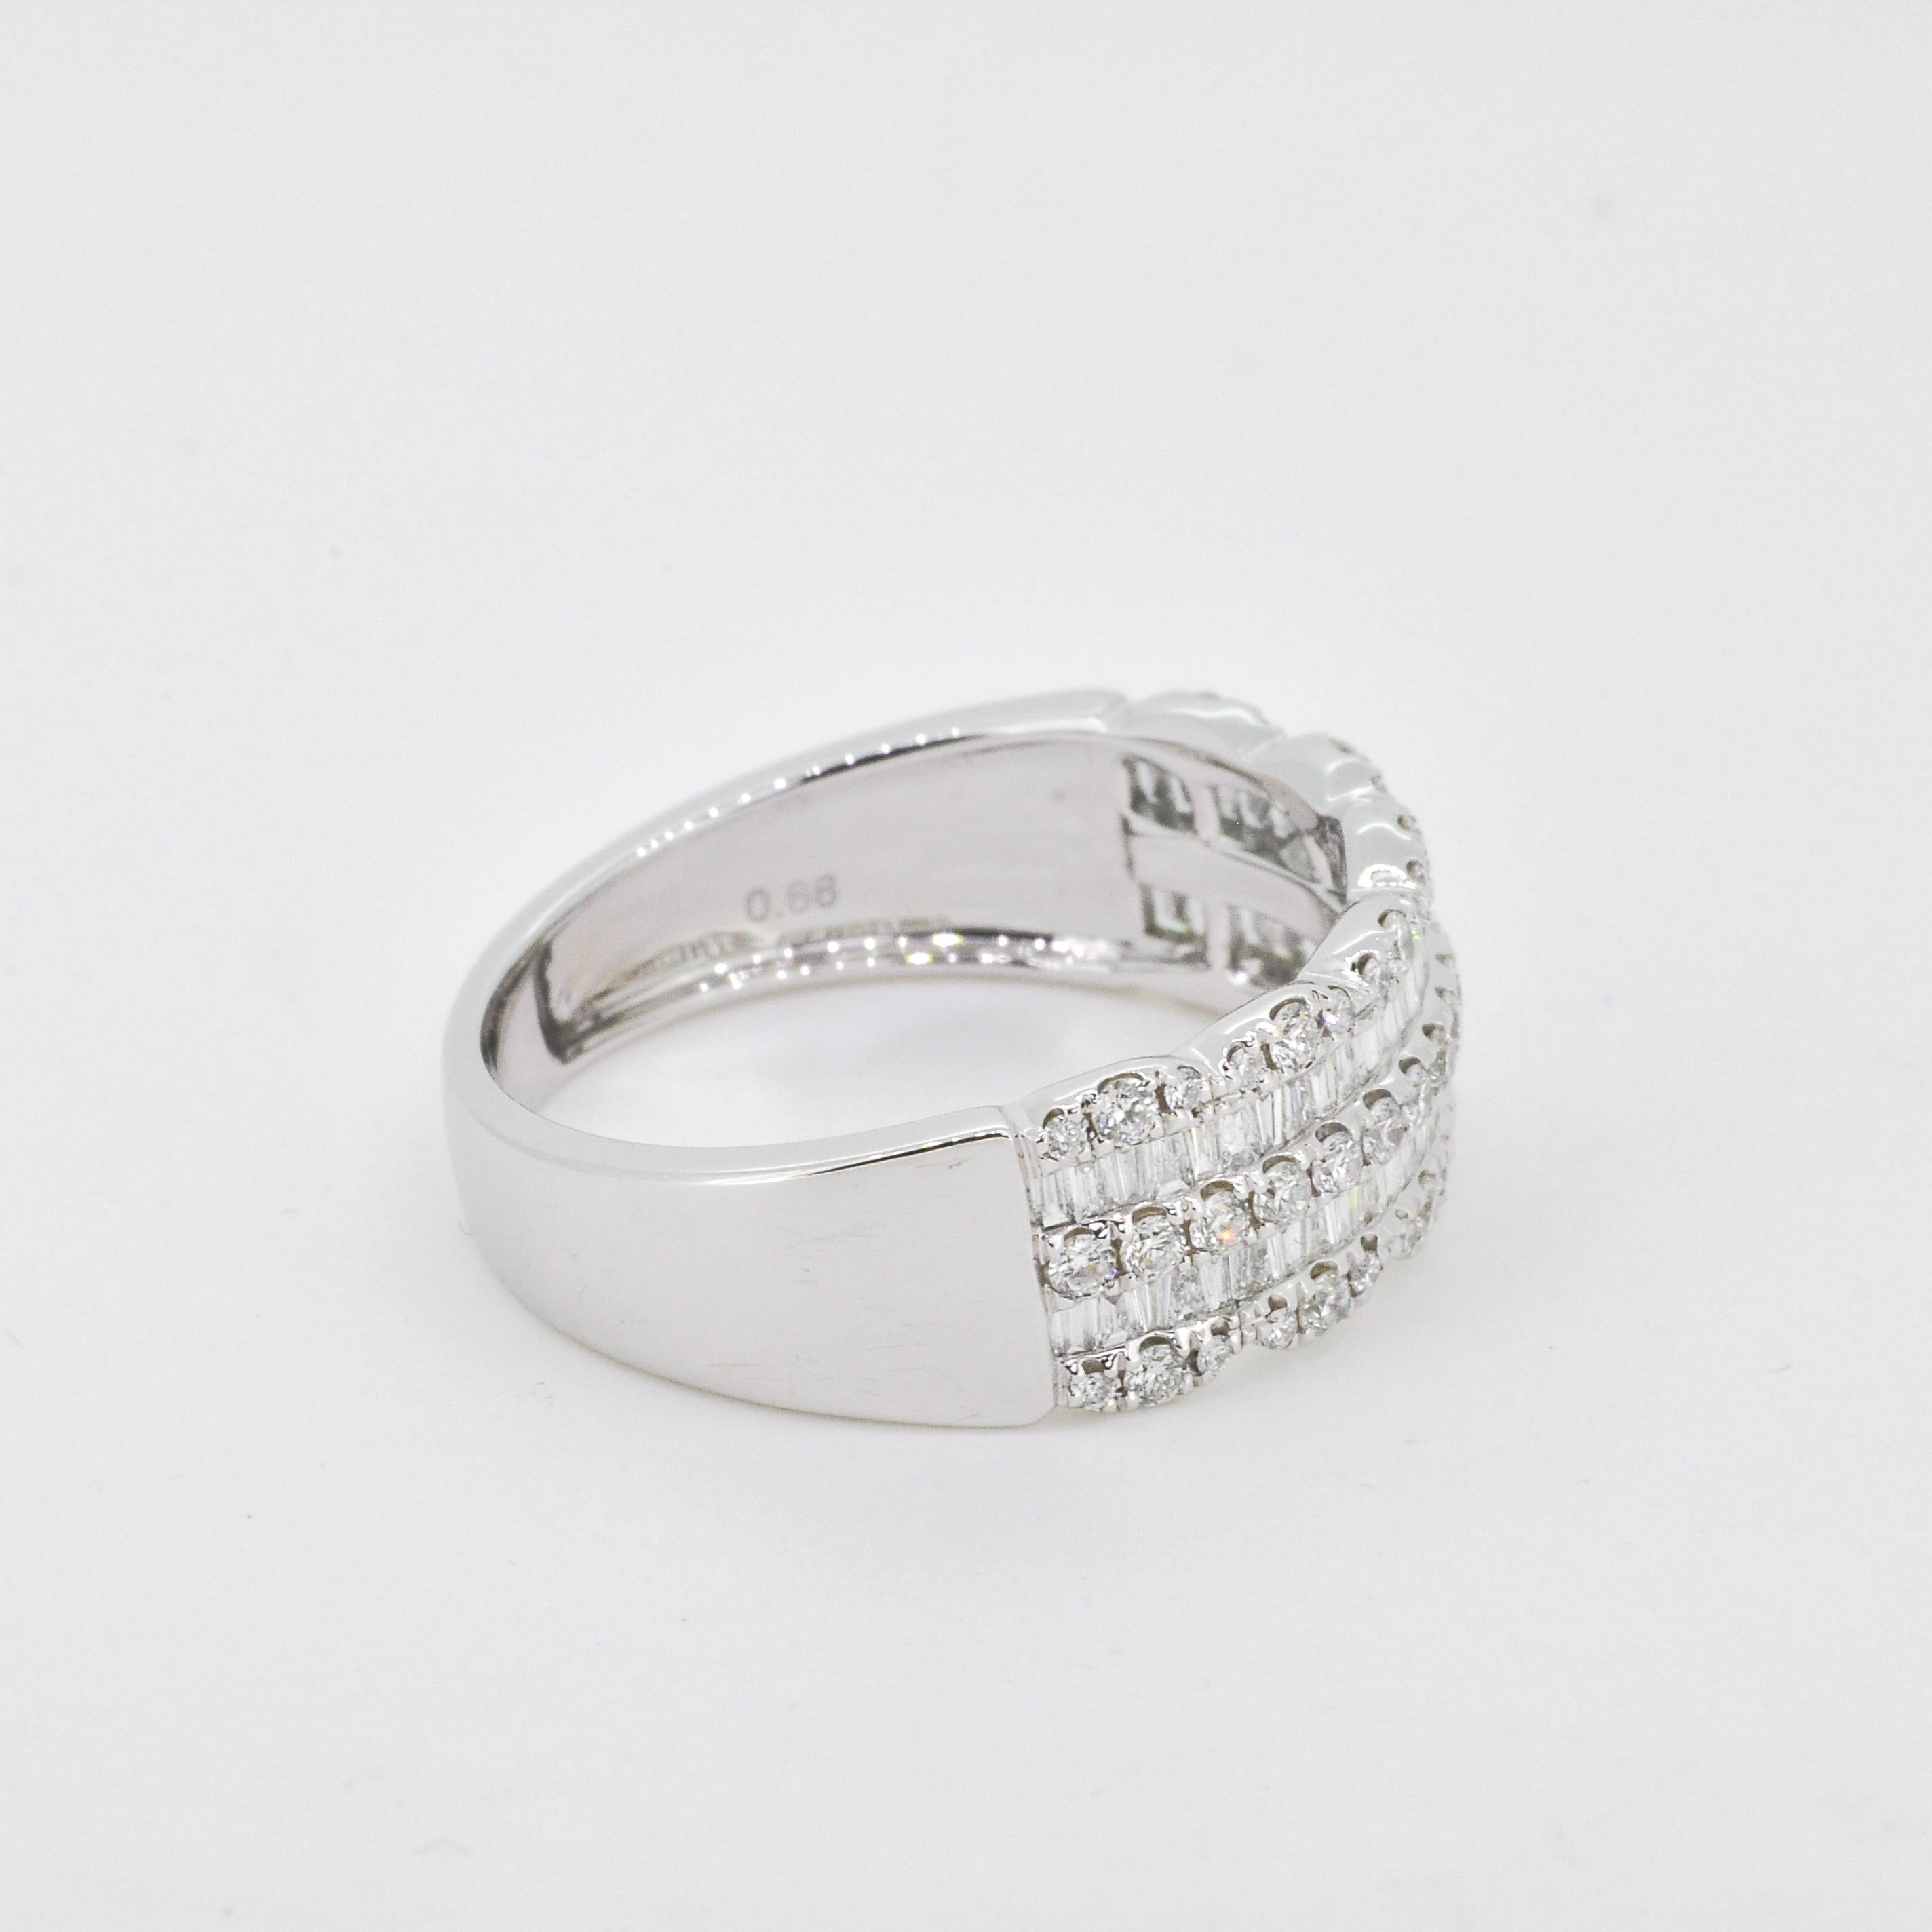 Baguette Cut Natural Diamond Ring 0.76 carat 18KT White Gold Cocktail Half Eternity Ring Band For Sale